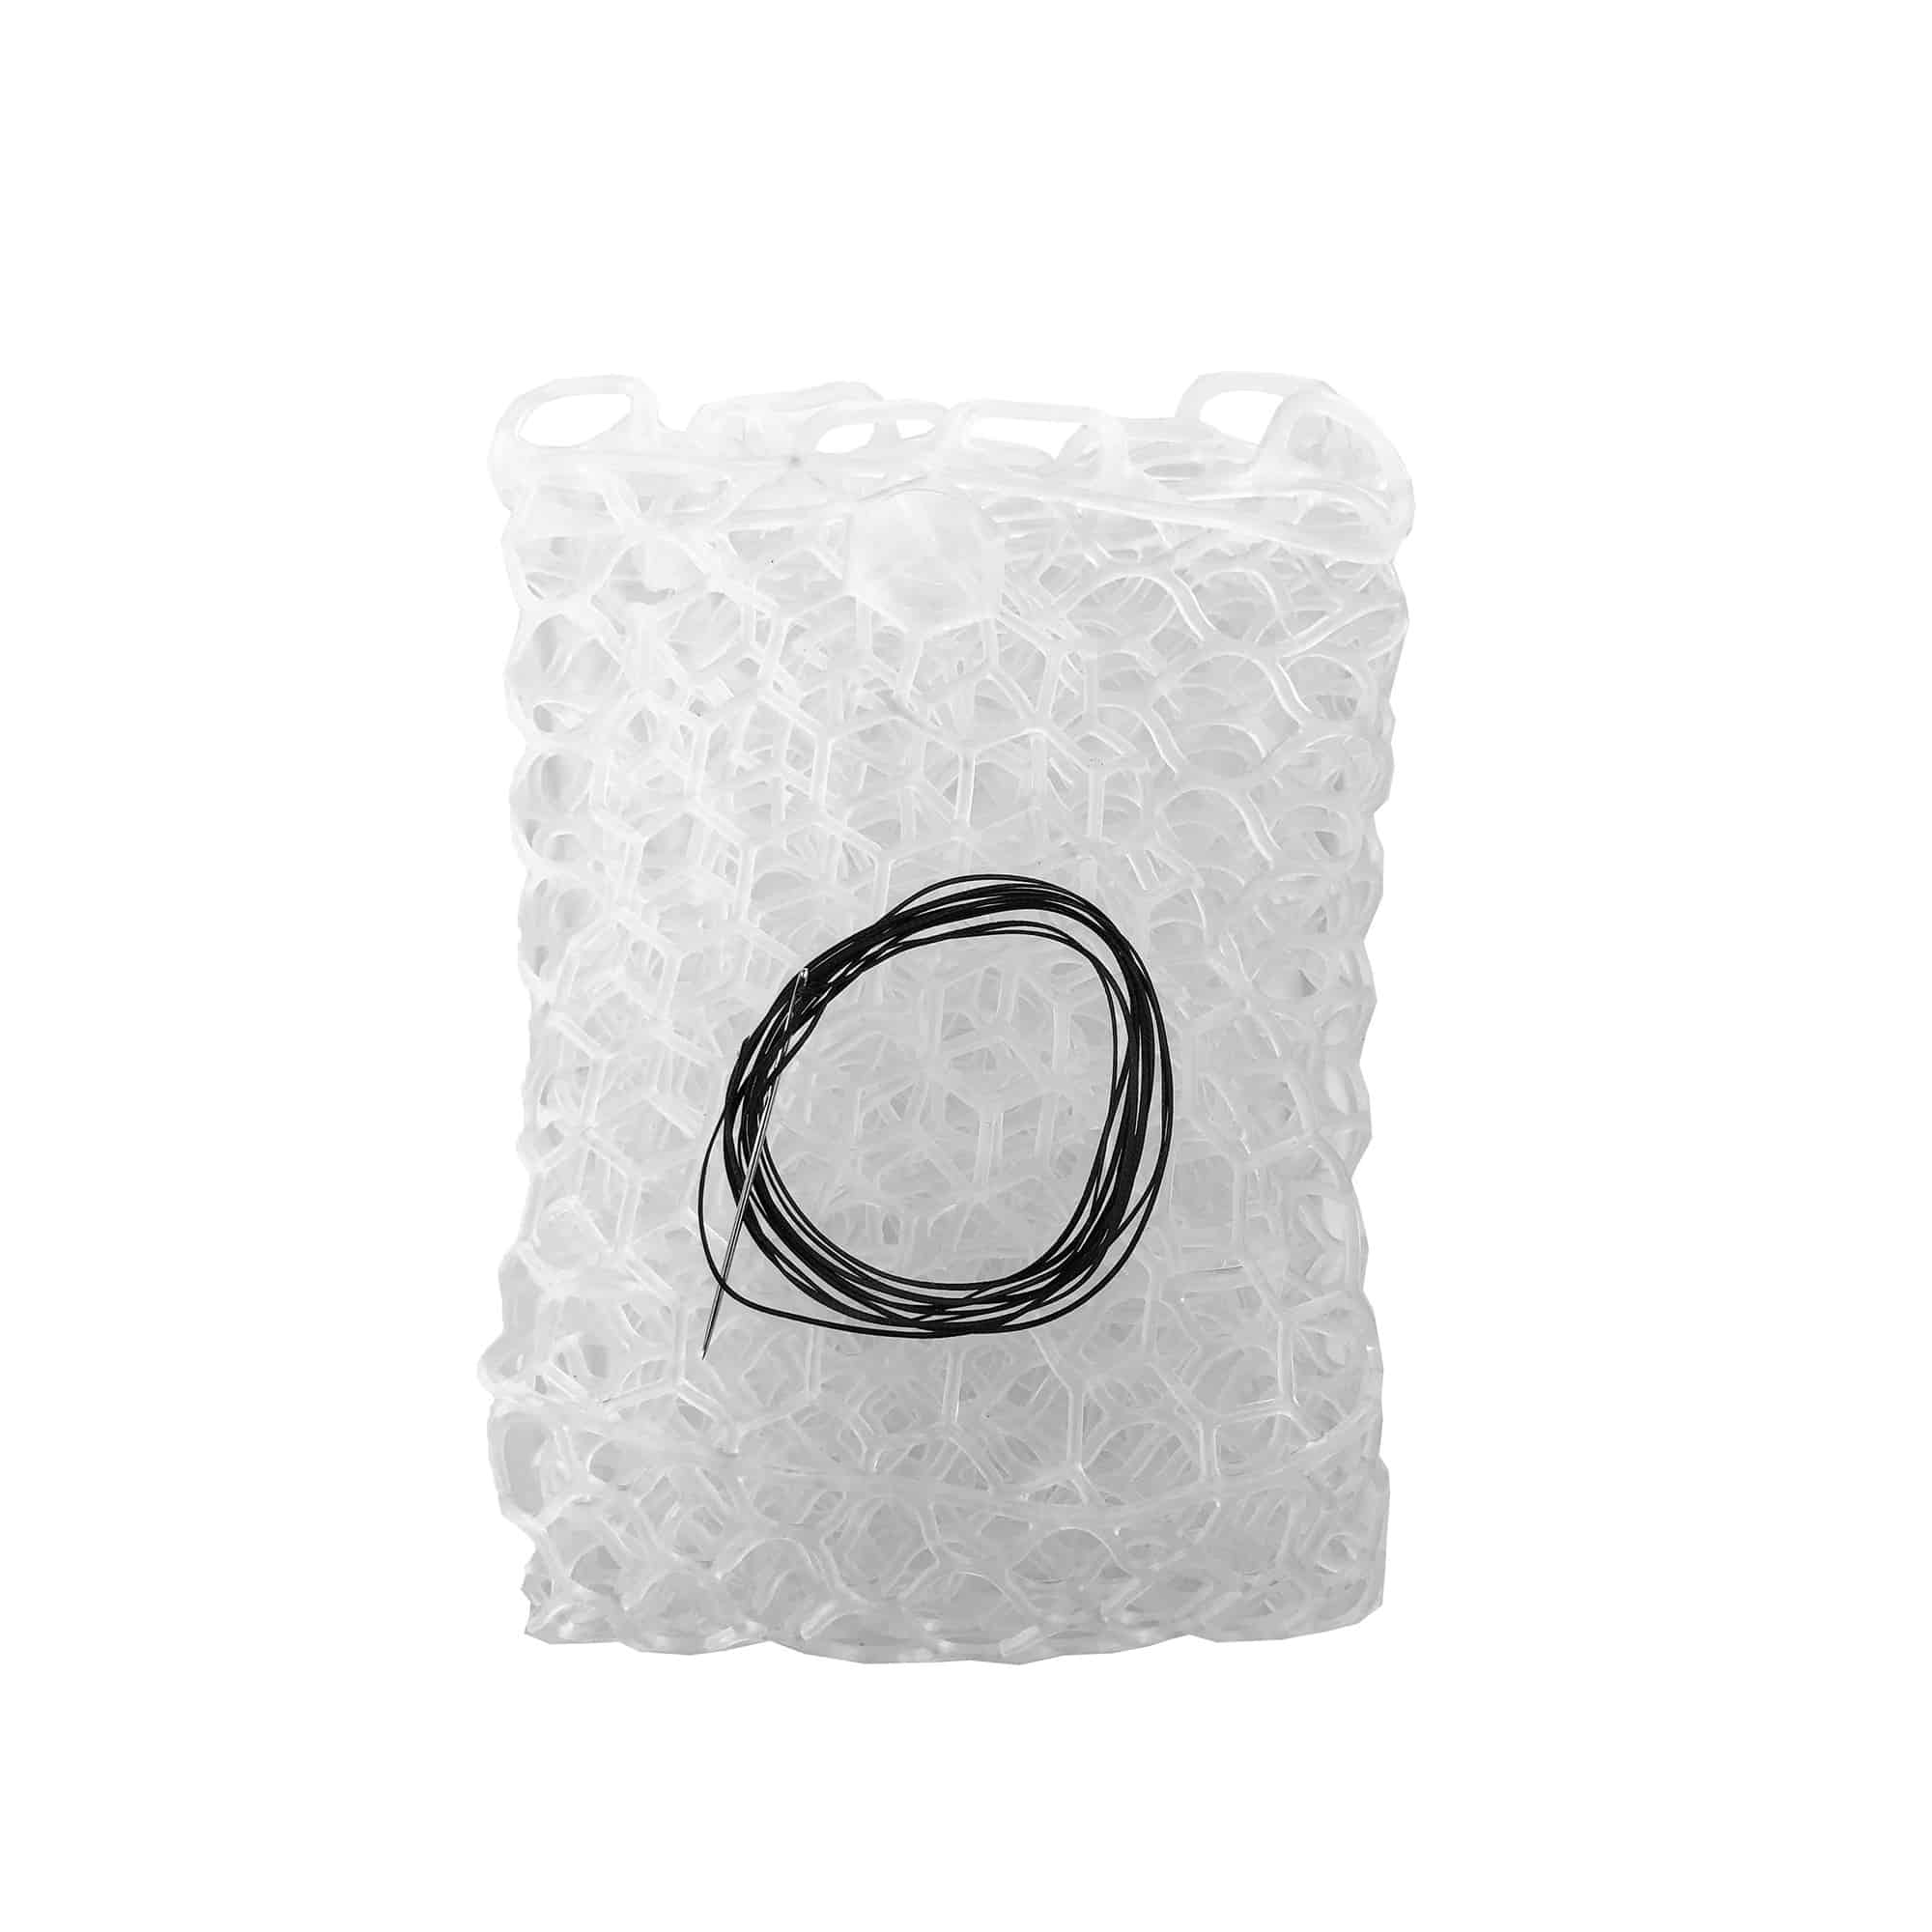 https://basinandbend.com/cdn/shop/products/Fishpond-Nomad-Replacement-Rubber-Net-15-Inch-Clear-Square-Opt_b9f81075-f8ae-4ca9-a60e-9141927a7666_2000x.jpg?v=1604970838